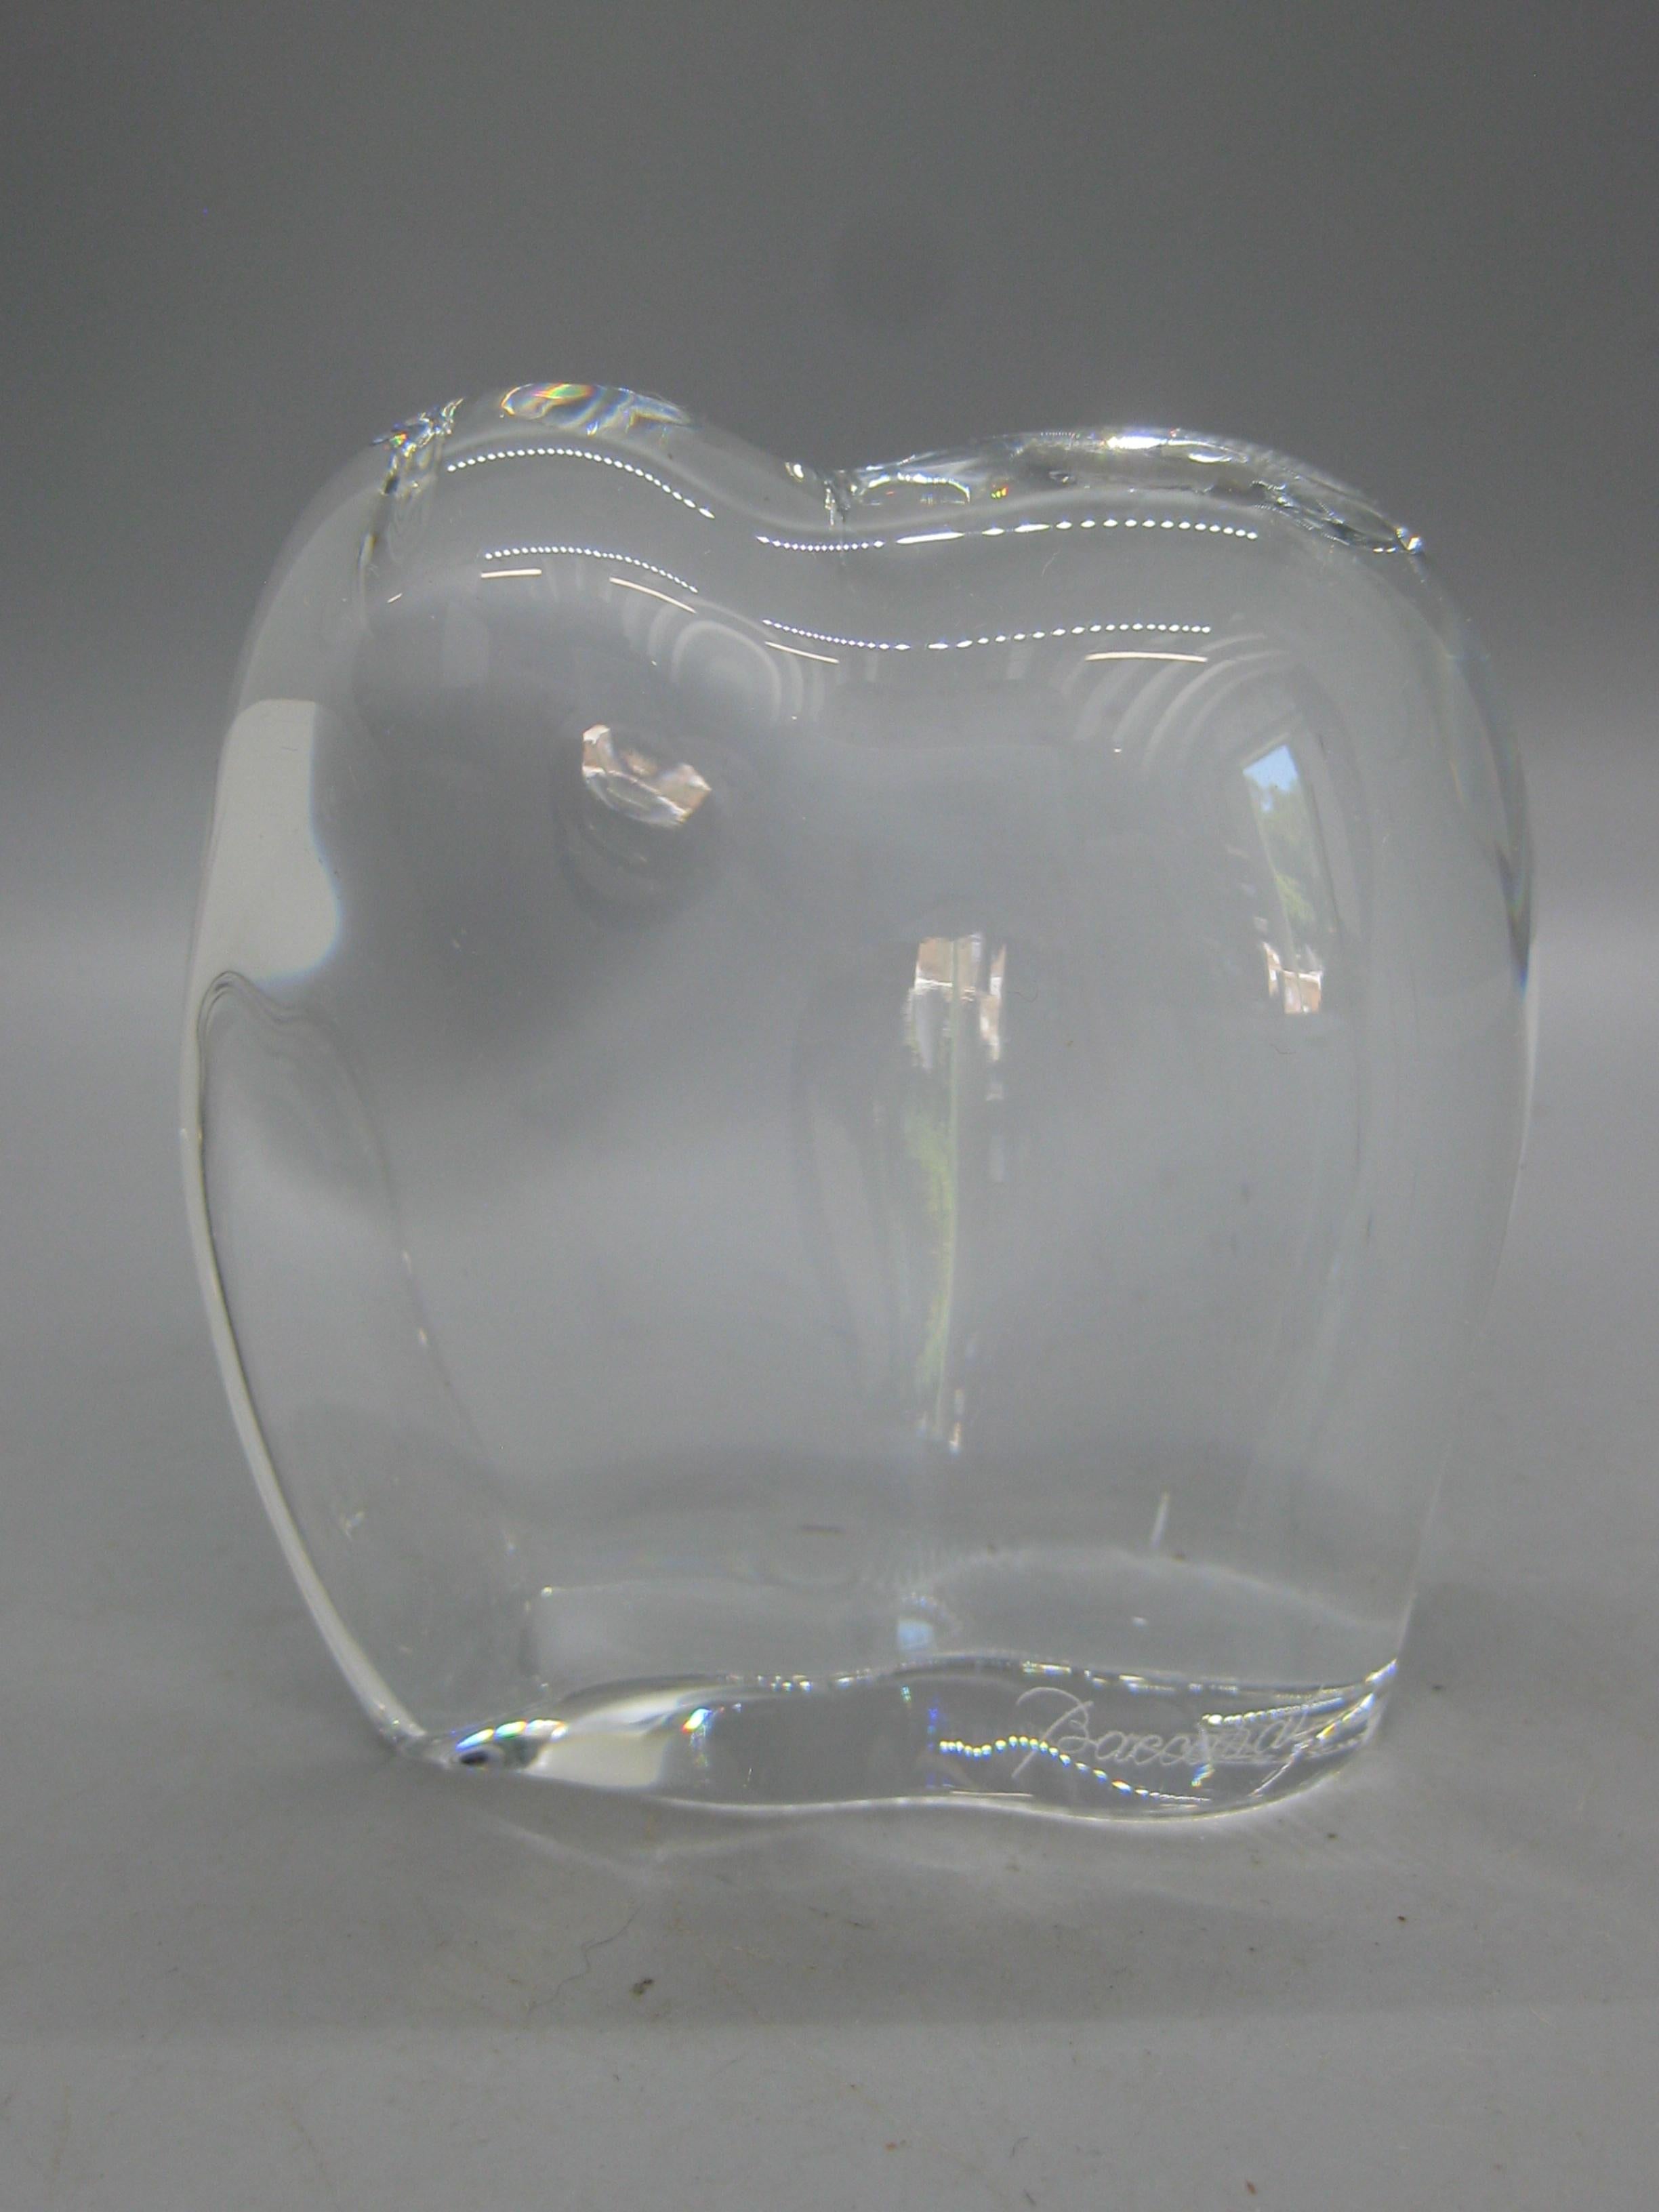 Wonderful Baccarat Crystal modernist Asian Elephant sculpture figurine/paperweight. Dates from the 1970's. Signed on the side and bottom. Made in France. In excellent condition for its age. No cracks, no nicks, no repairs and no chips. Light surface